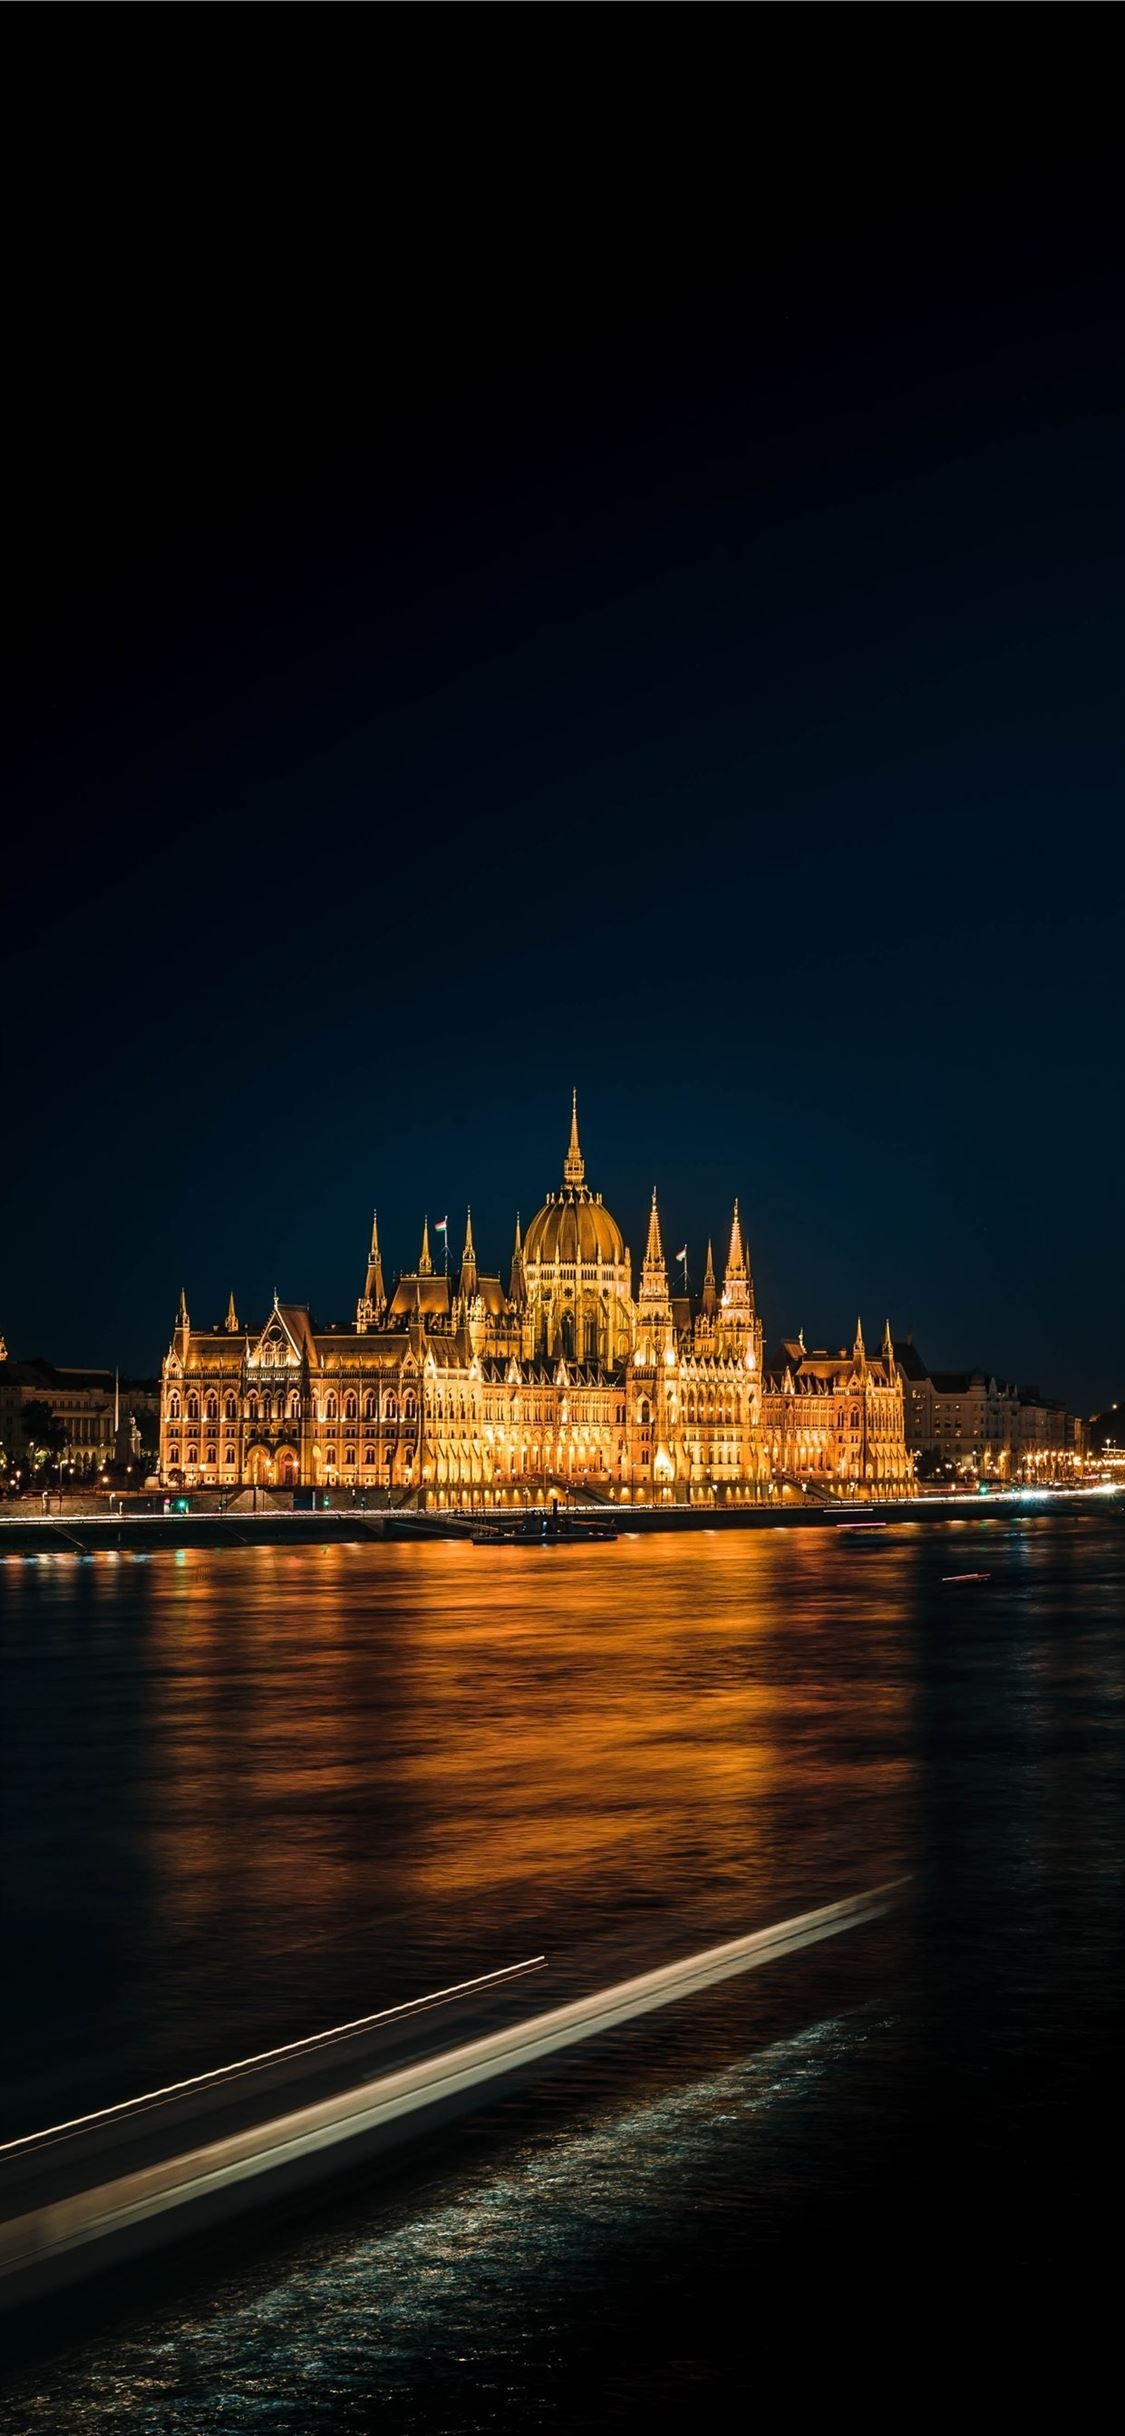 Budapest: The Parliament building built in a neo-Gothic style, Danube. 1130x2440 HD Wallpaper.